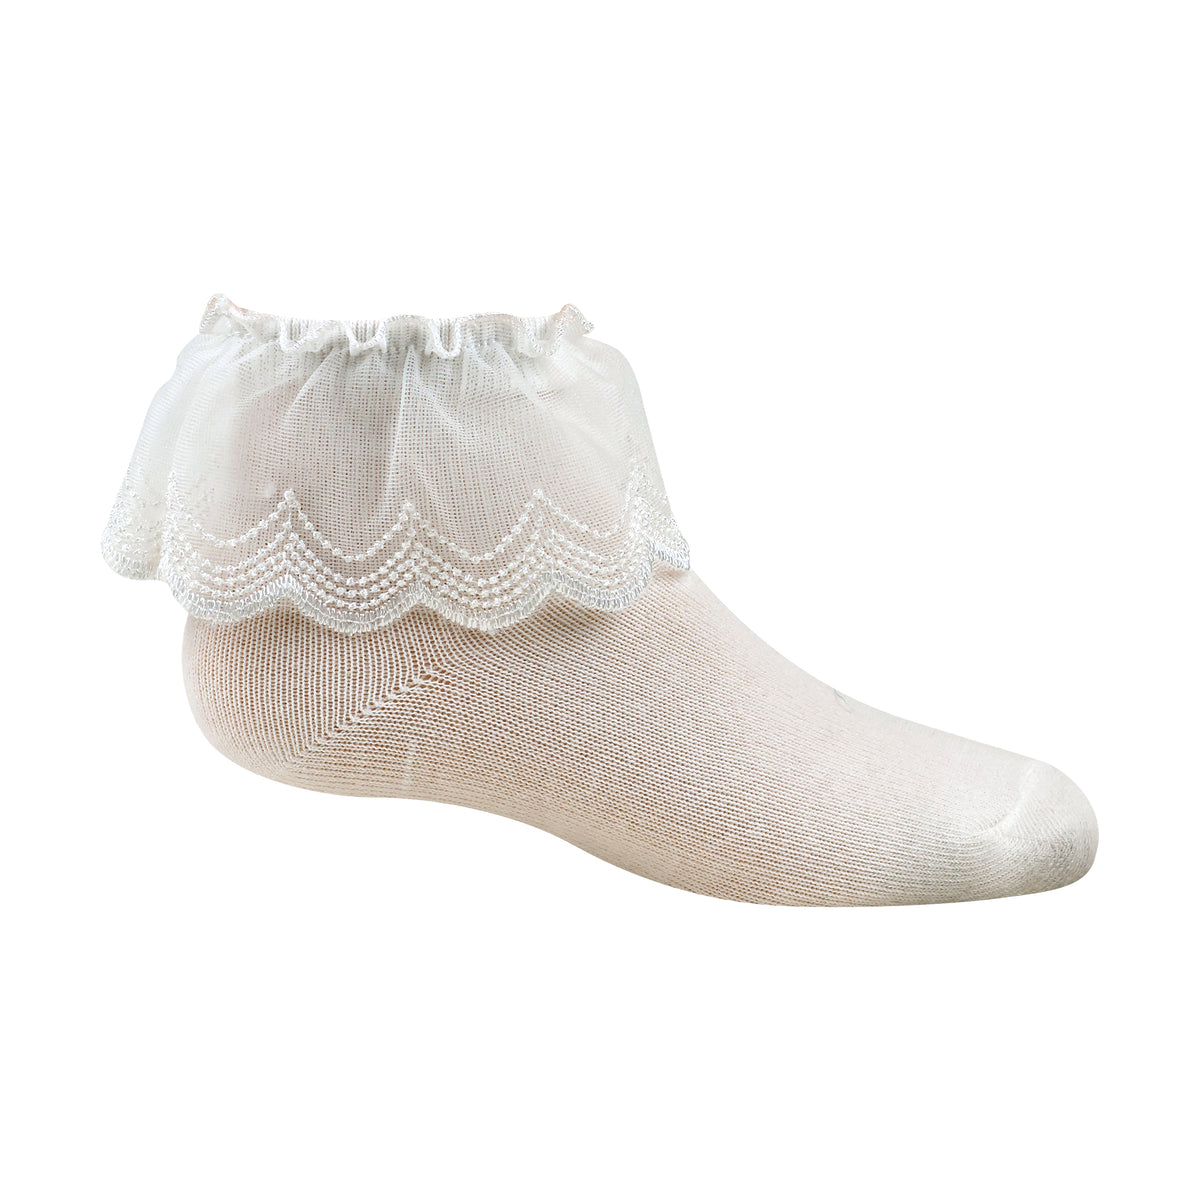 Scalloped Design Ruffle Ankle